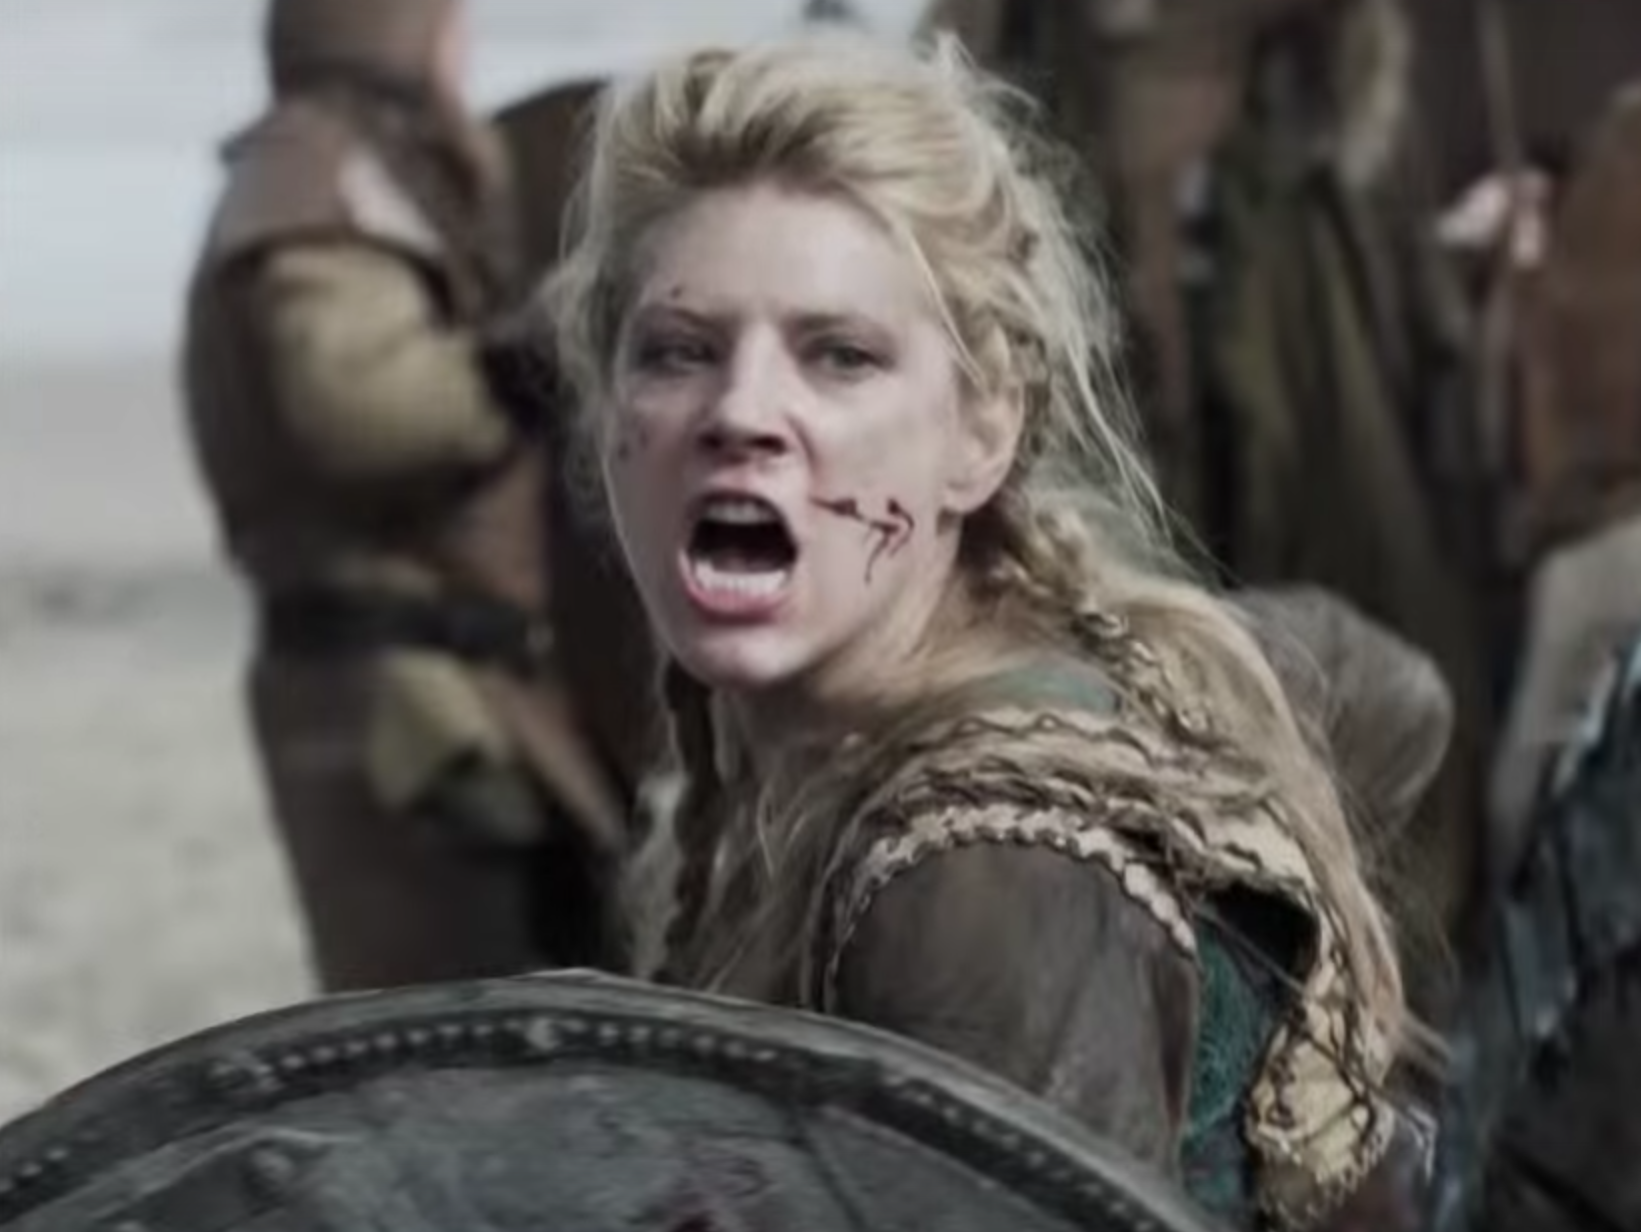 Scientists have uncovered evidence that female Viking warriors existed